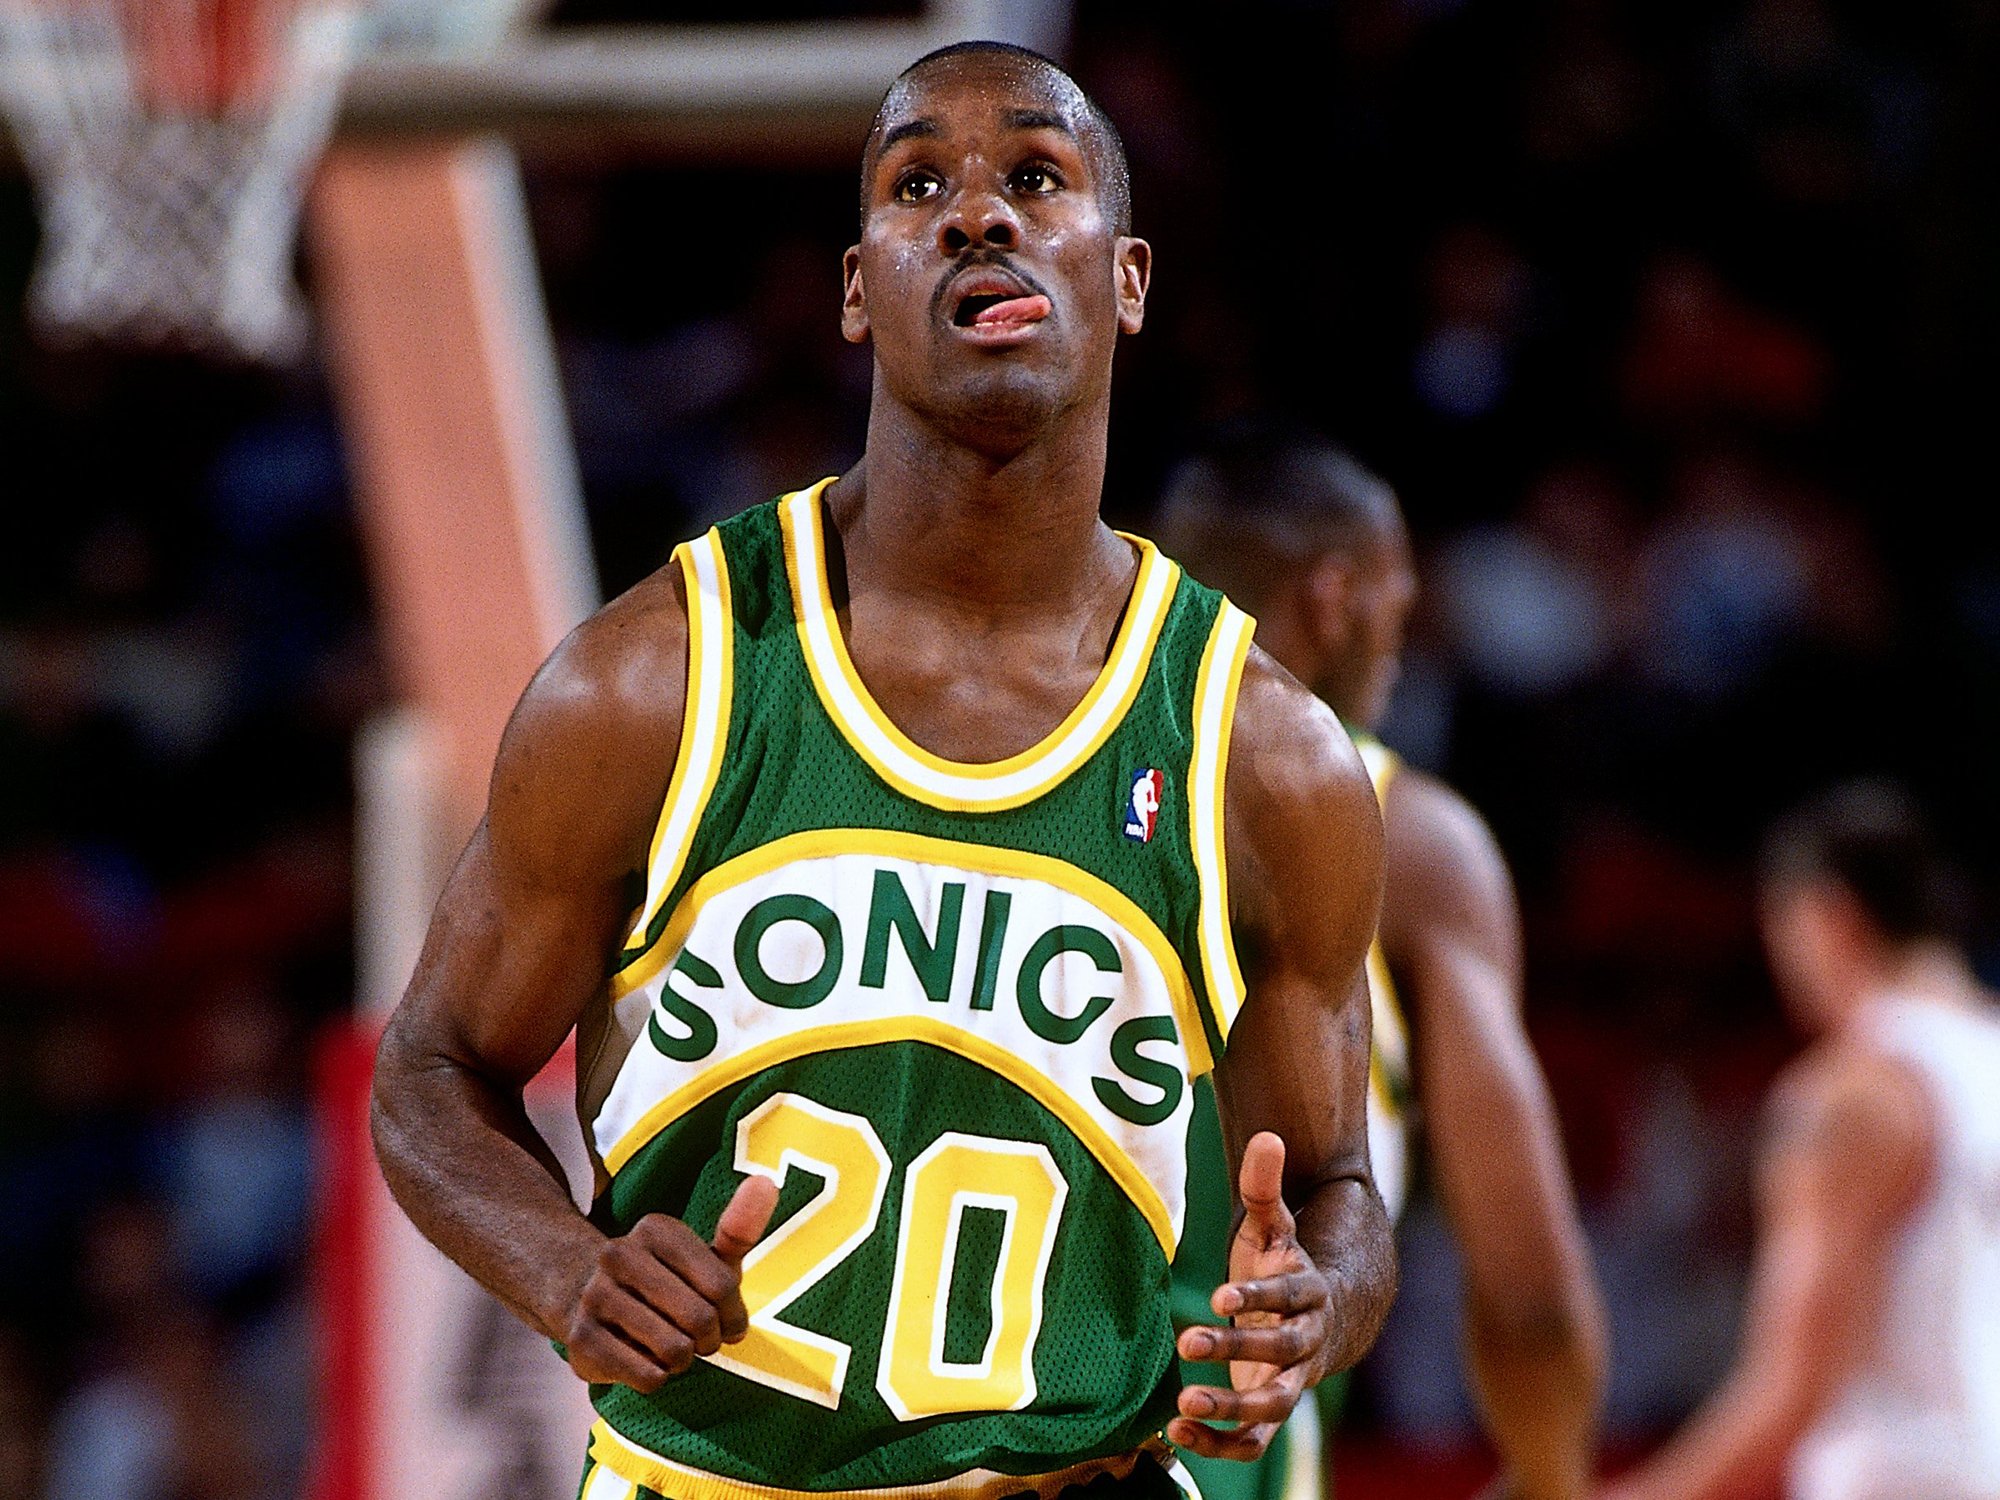 Top 30 NBA Jerseys of All-Time